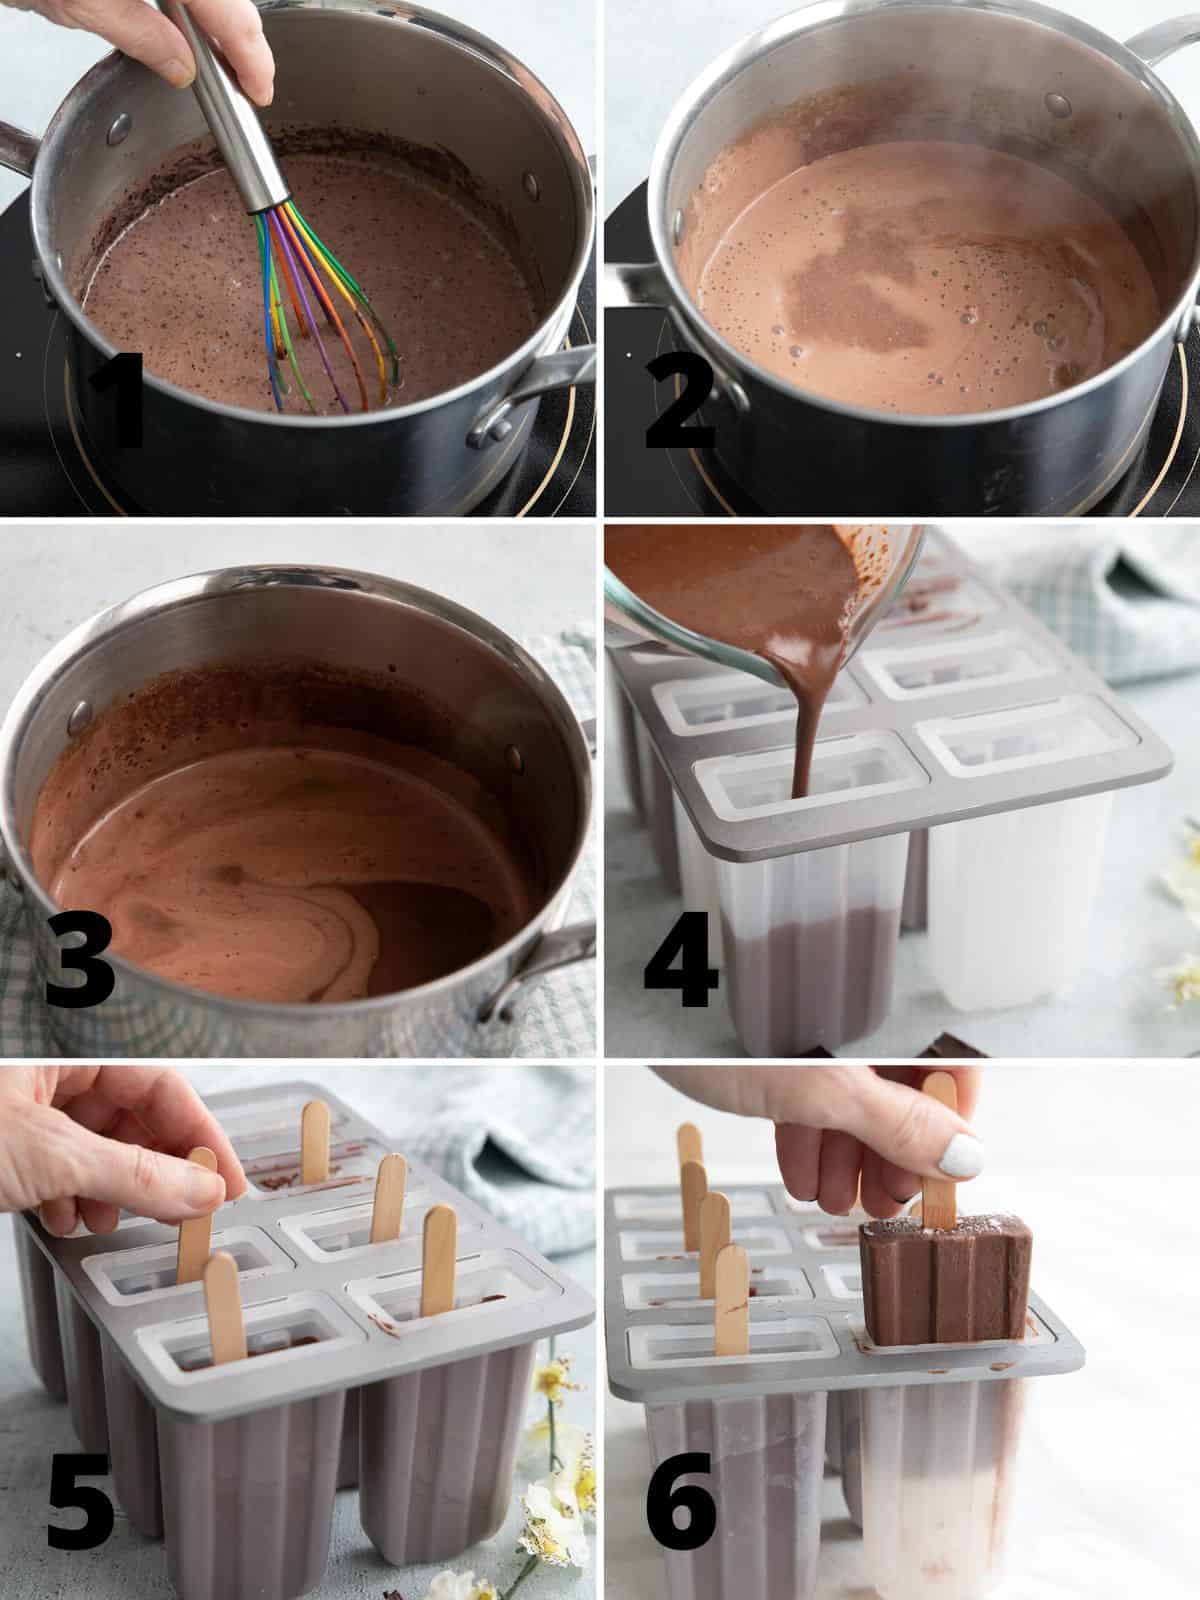 A collage of 6 images showing how to make Keto Fudgesicles.